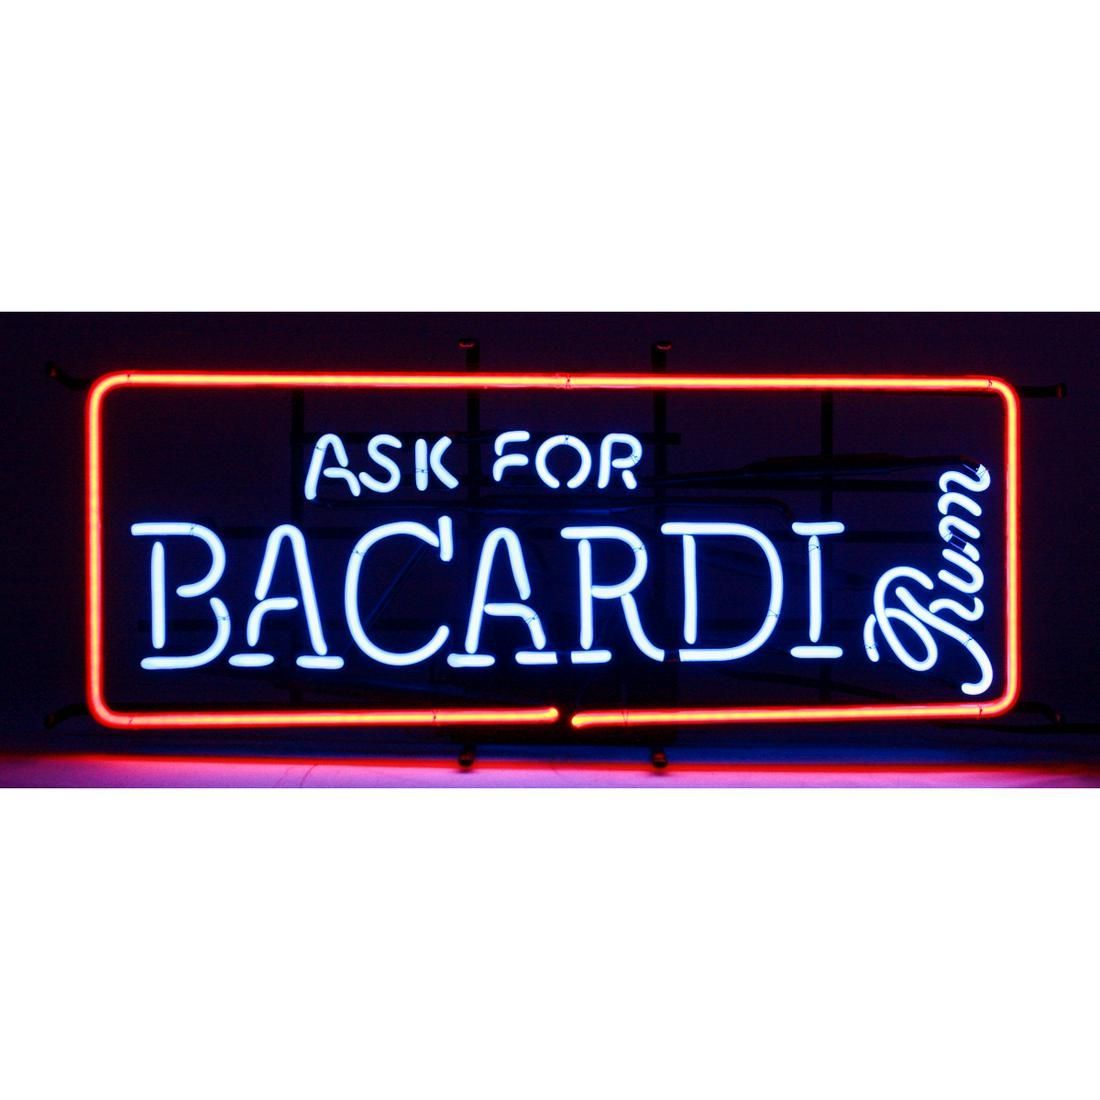 Original Vintage Ask For Bacardi Rum Neon Sign Insegna al neon Ask For Bacardi R&hellip;